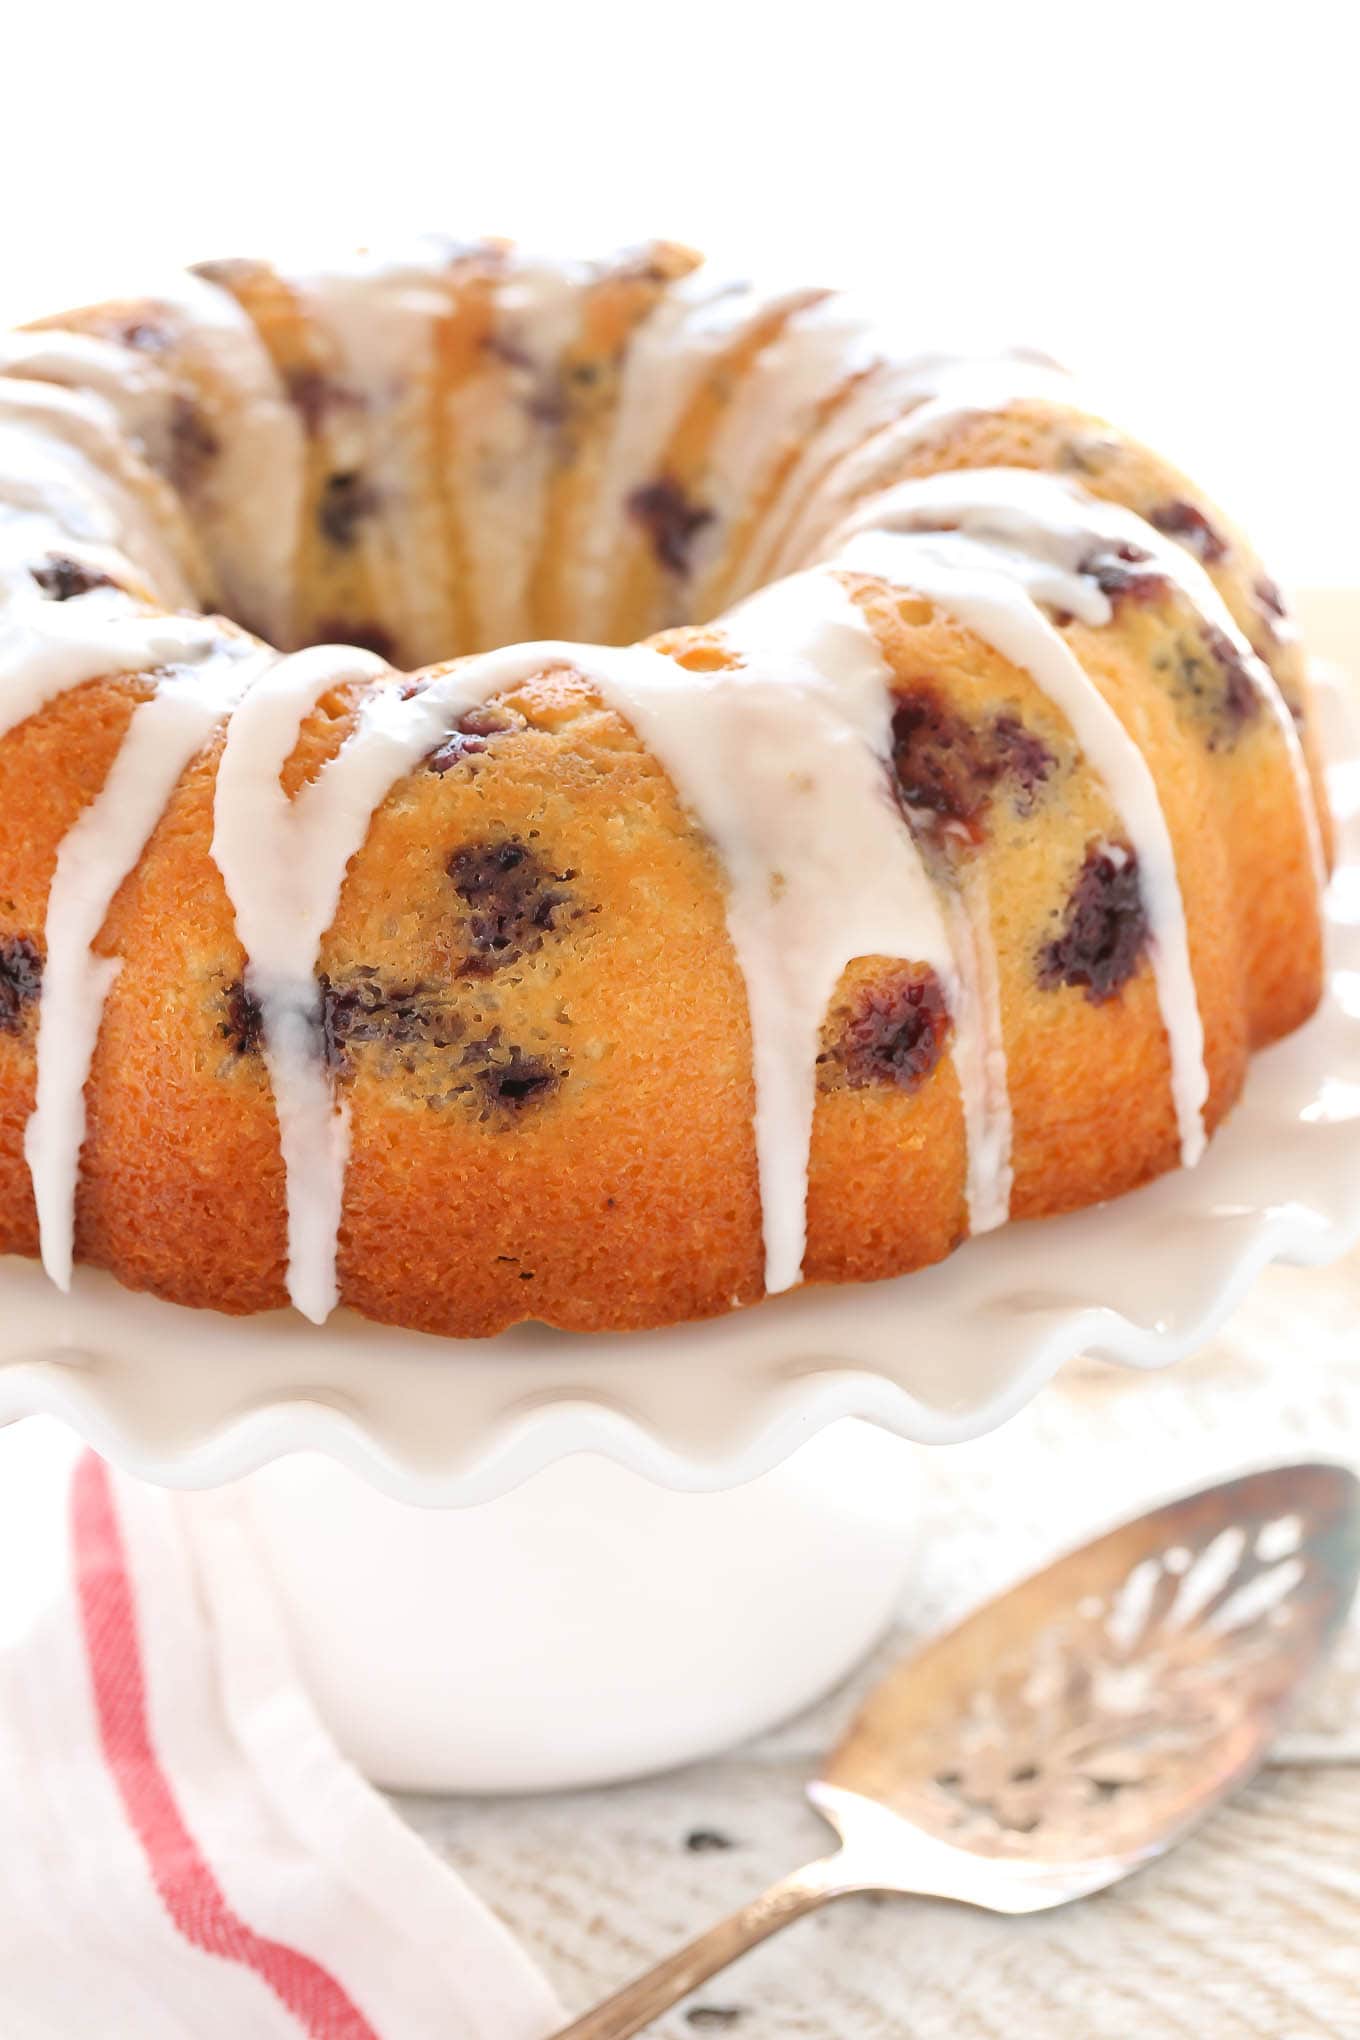 Can you freeze nothing but bundt cakes?